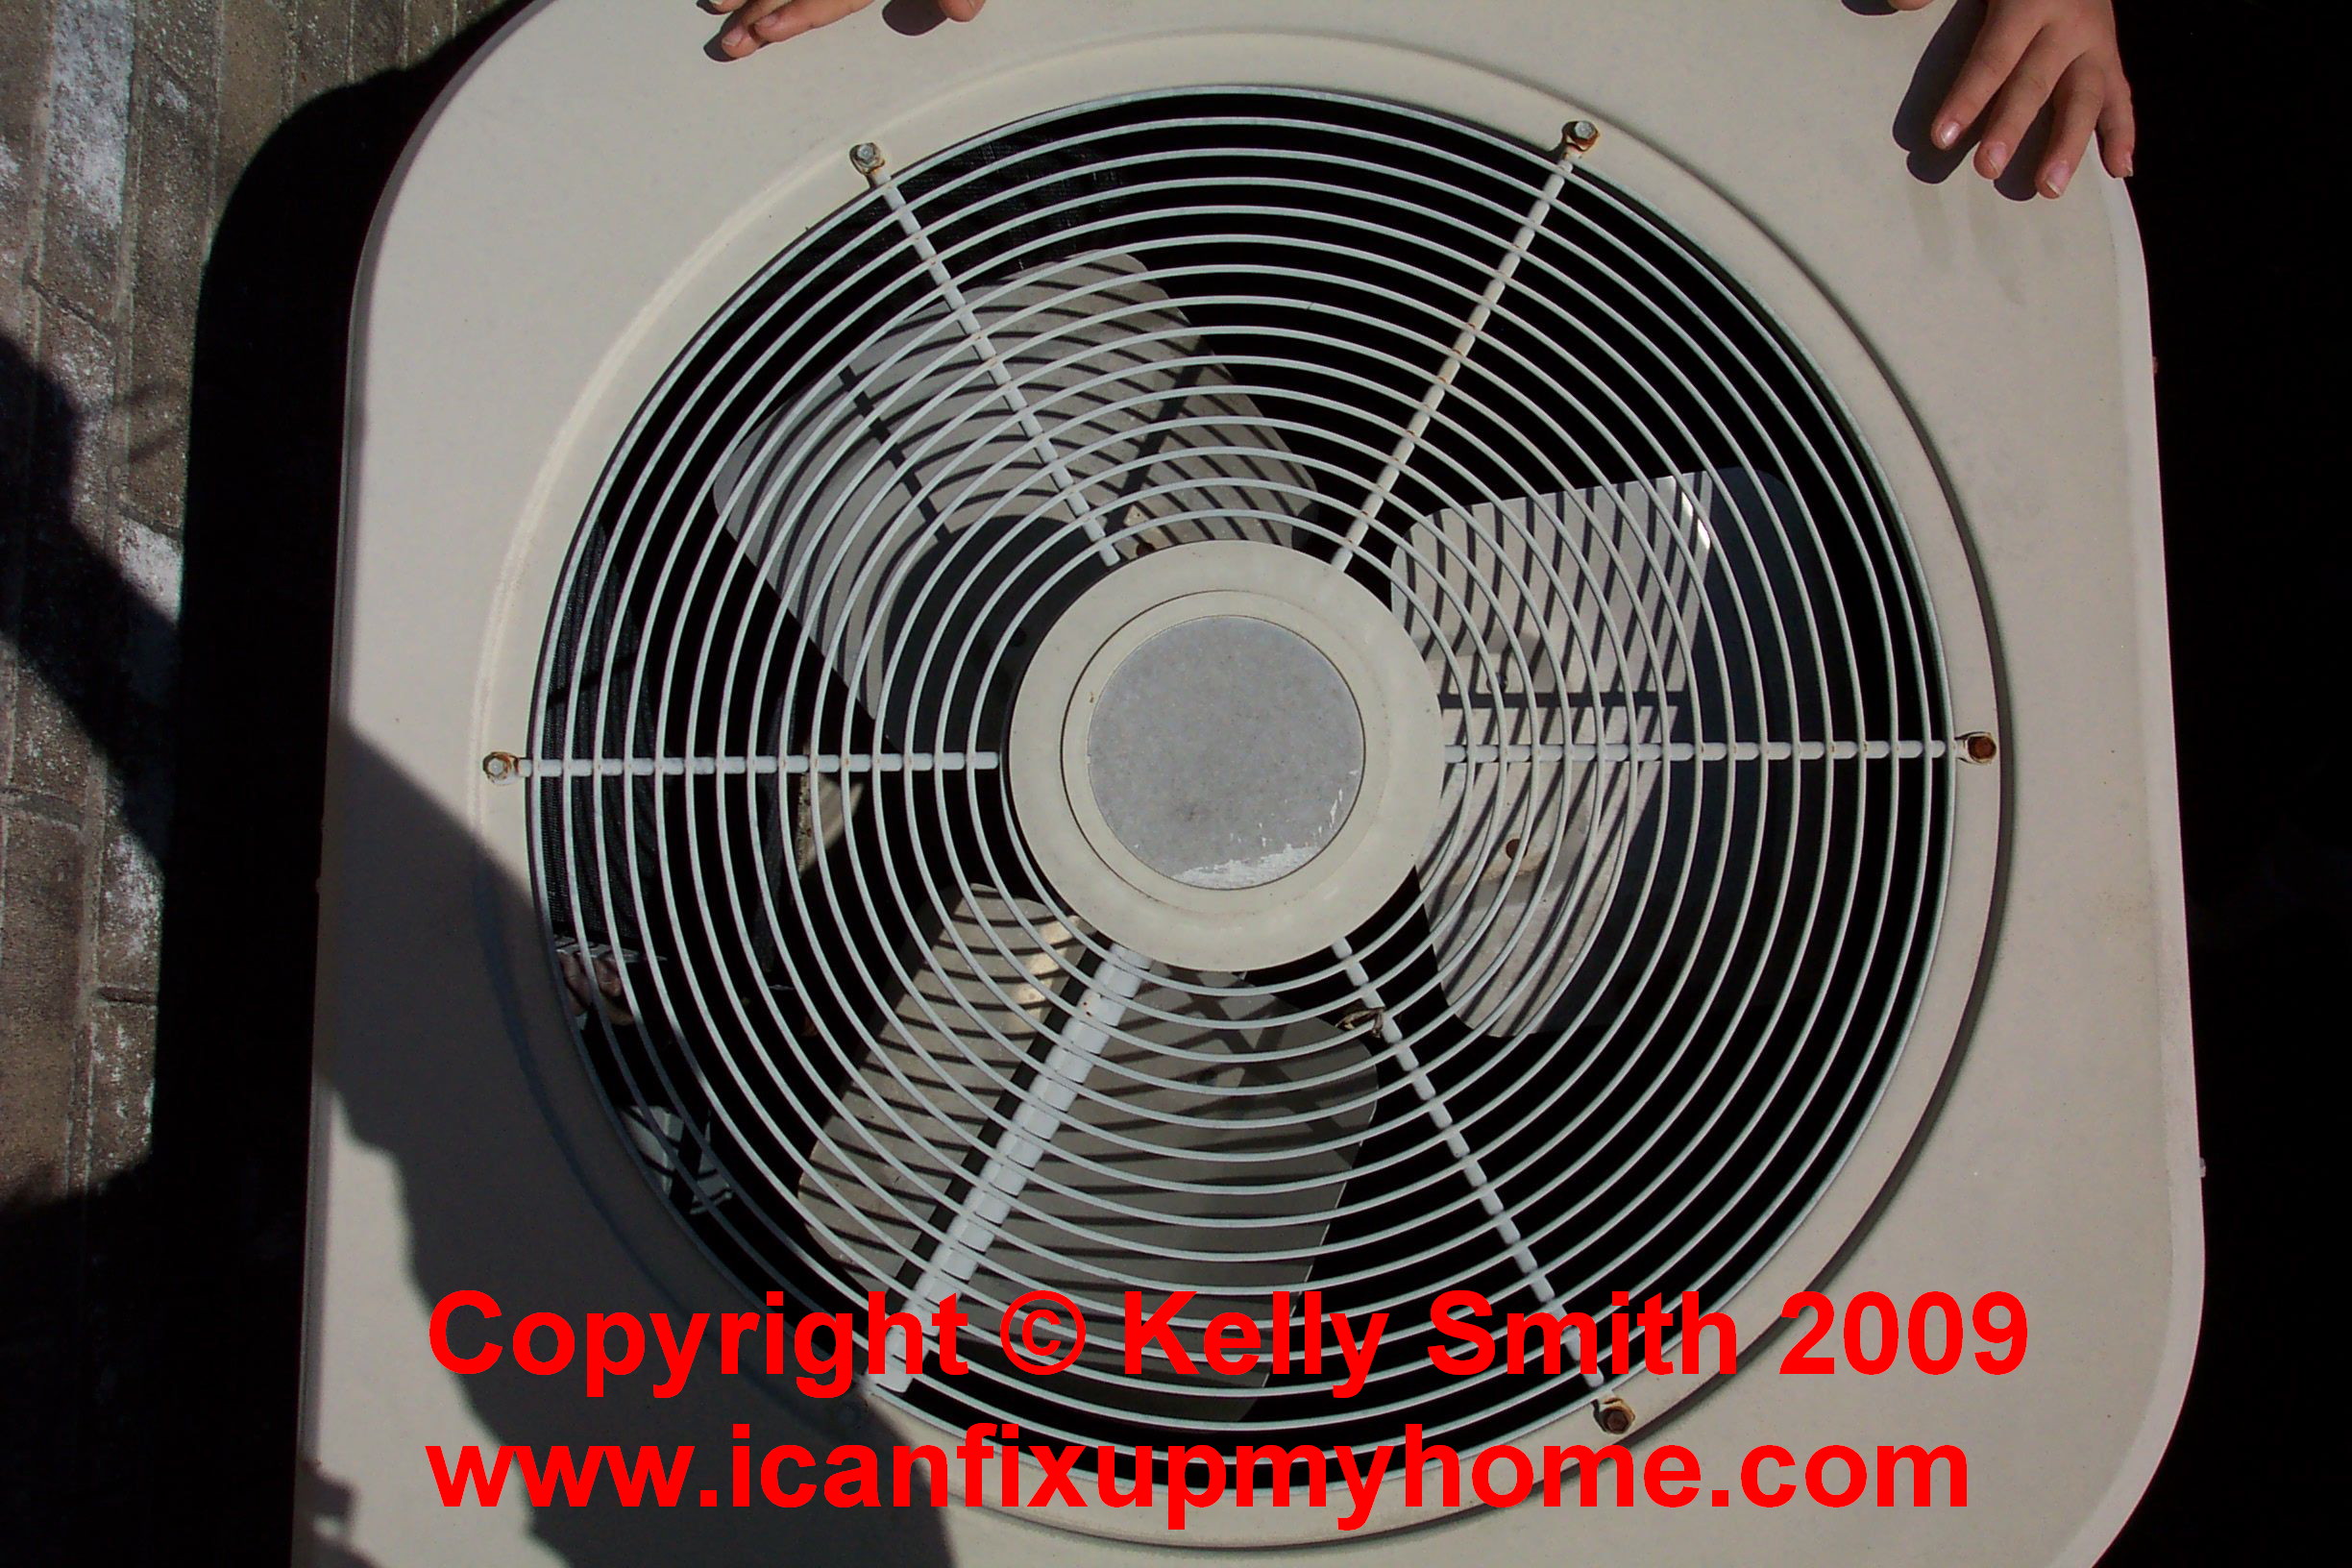 AIR CONDITIONING SYSTEMS TIPS AND GUIDE